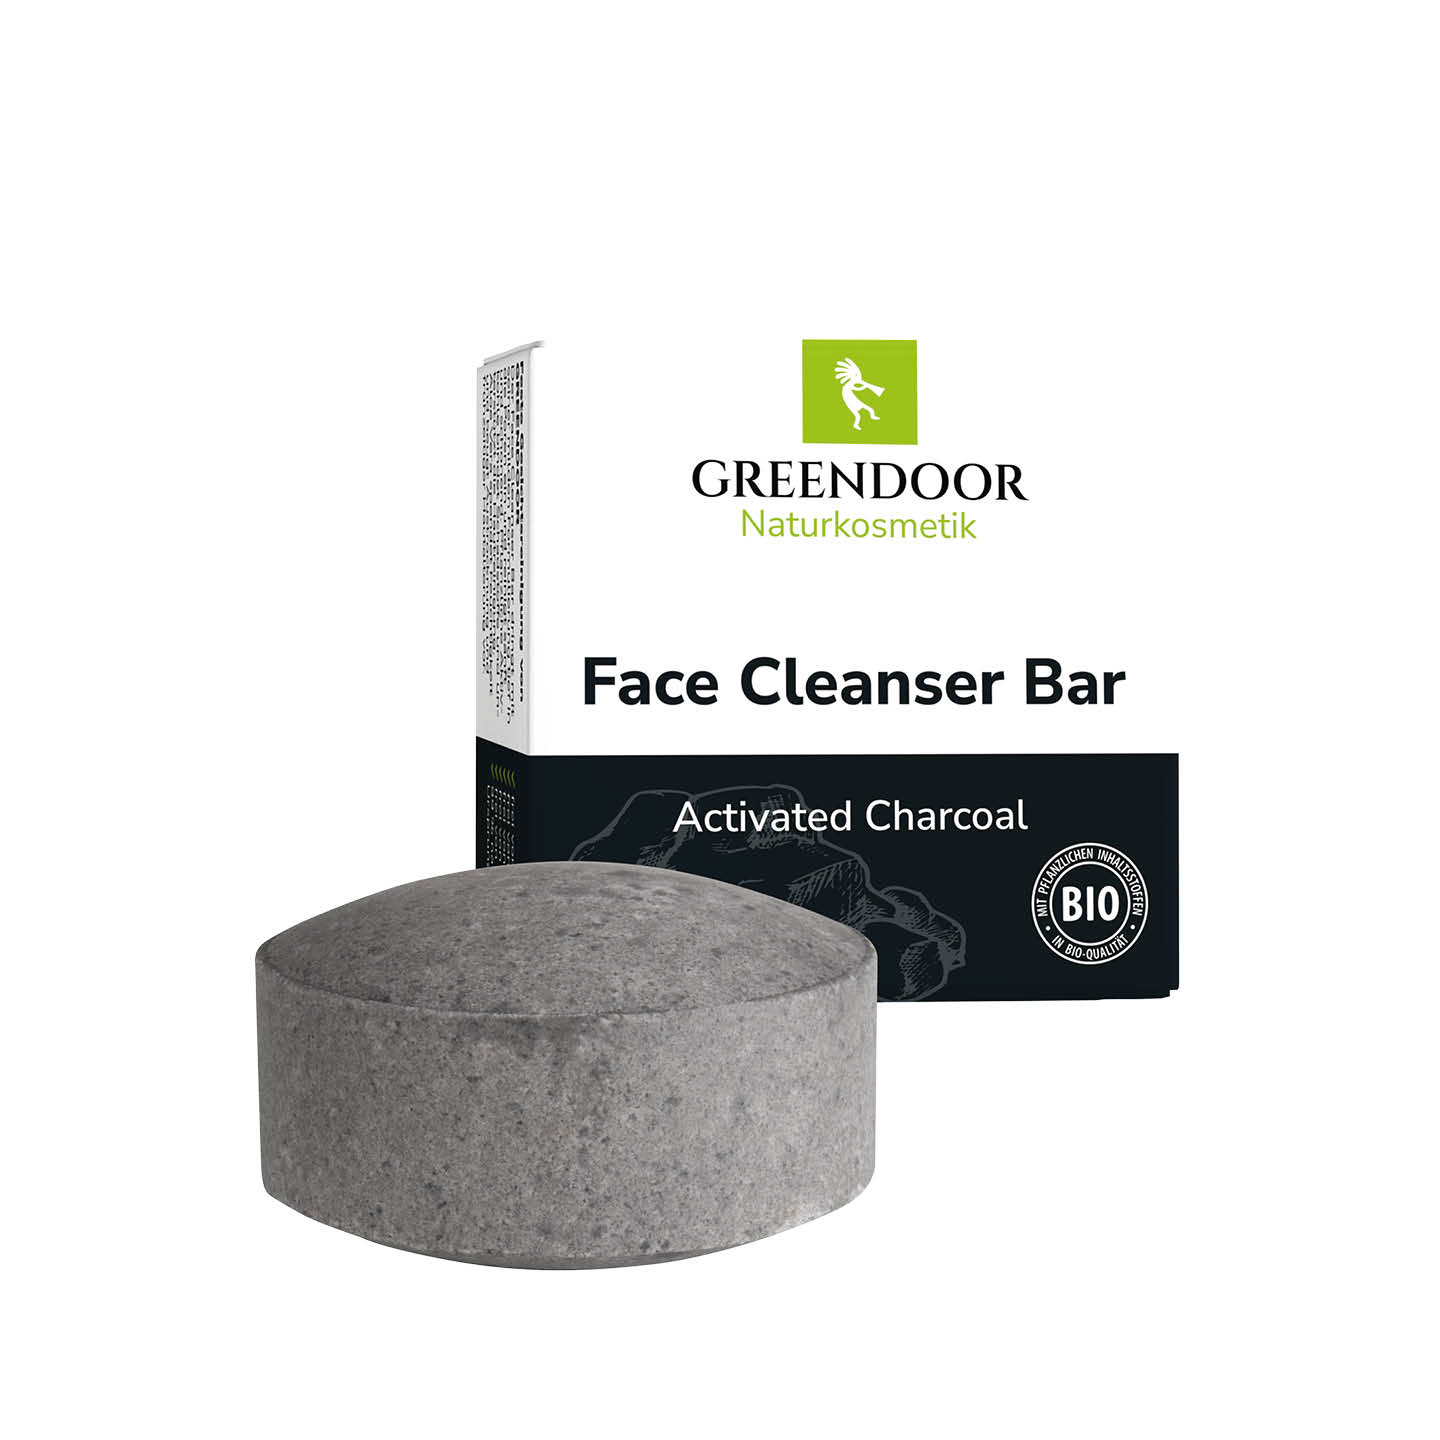 Face Cleanser Bar Activated Charcoal